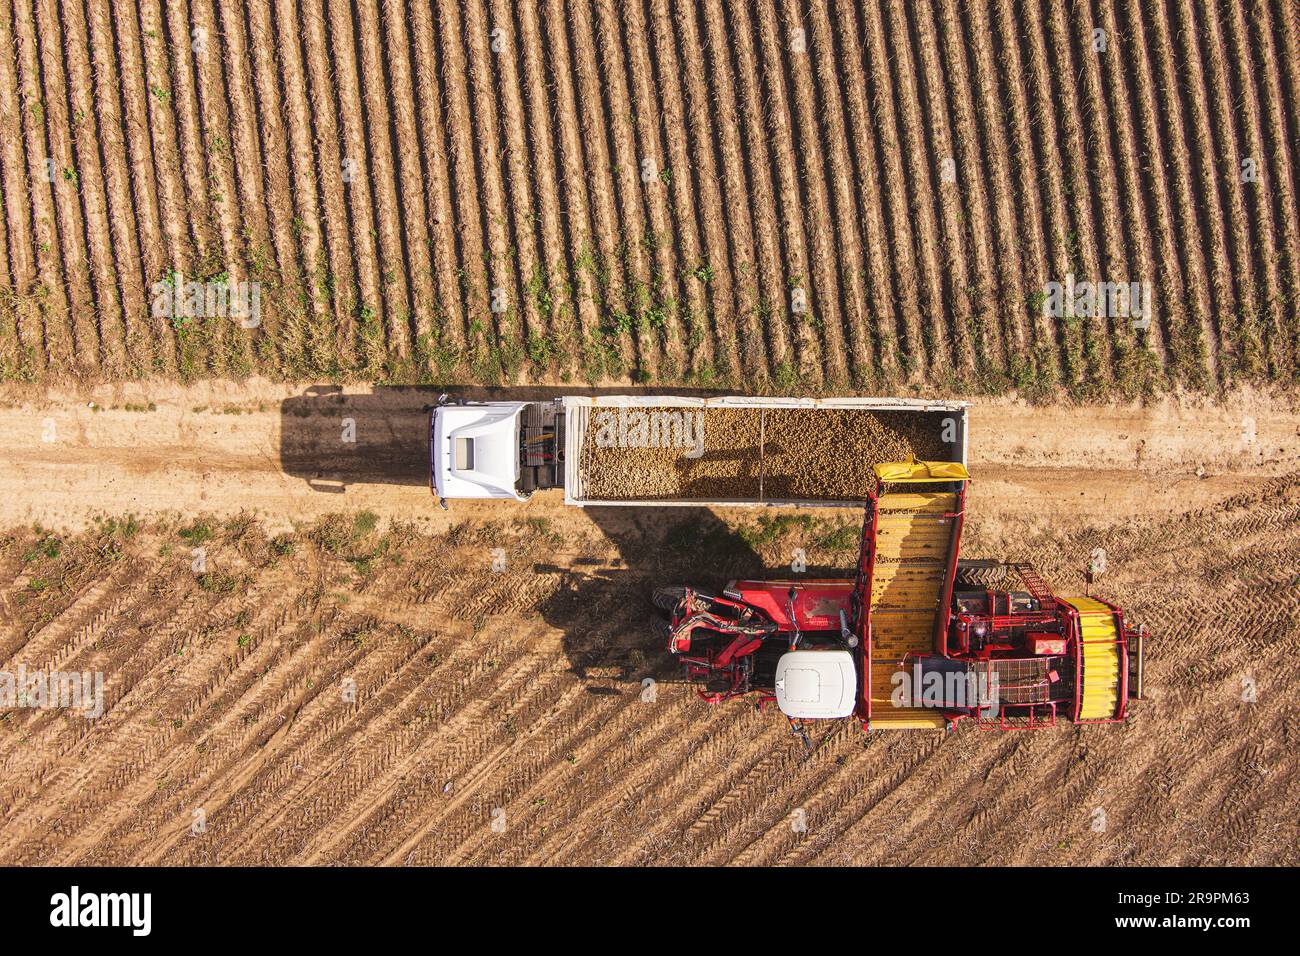 Agricultural potato combine harvester loads potatoes into truck at field. Stock Photo